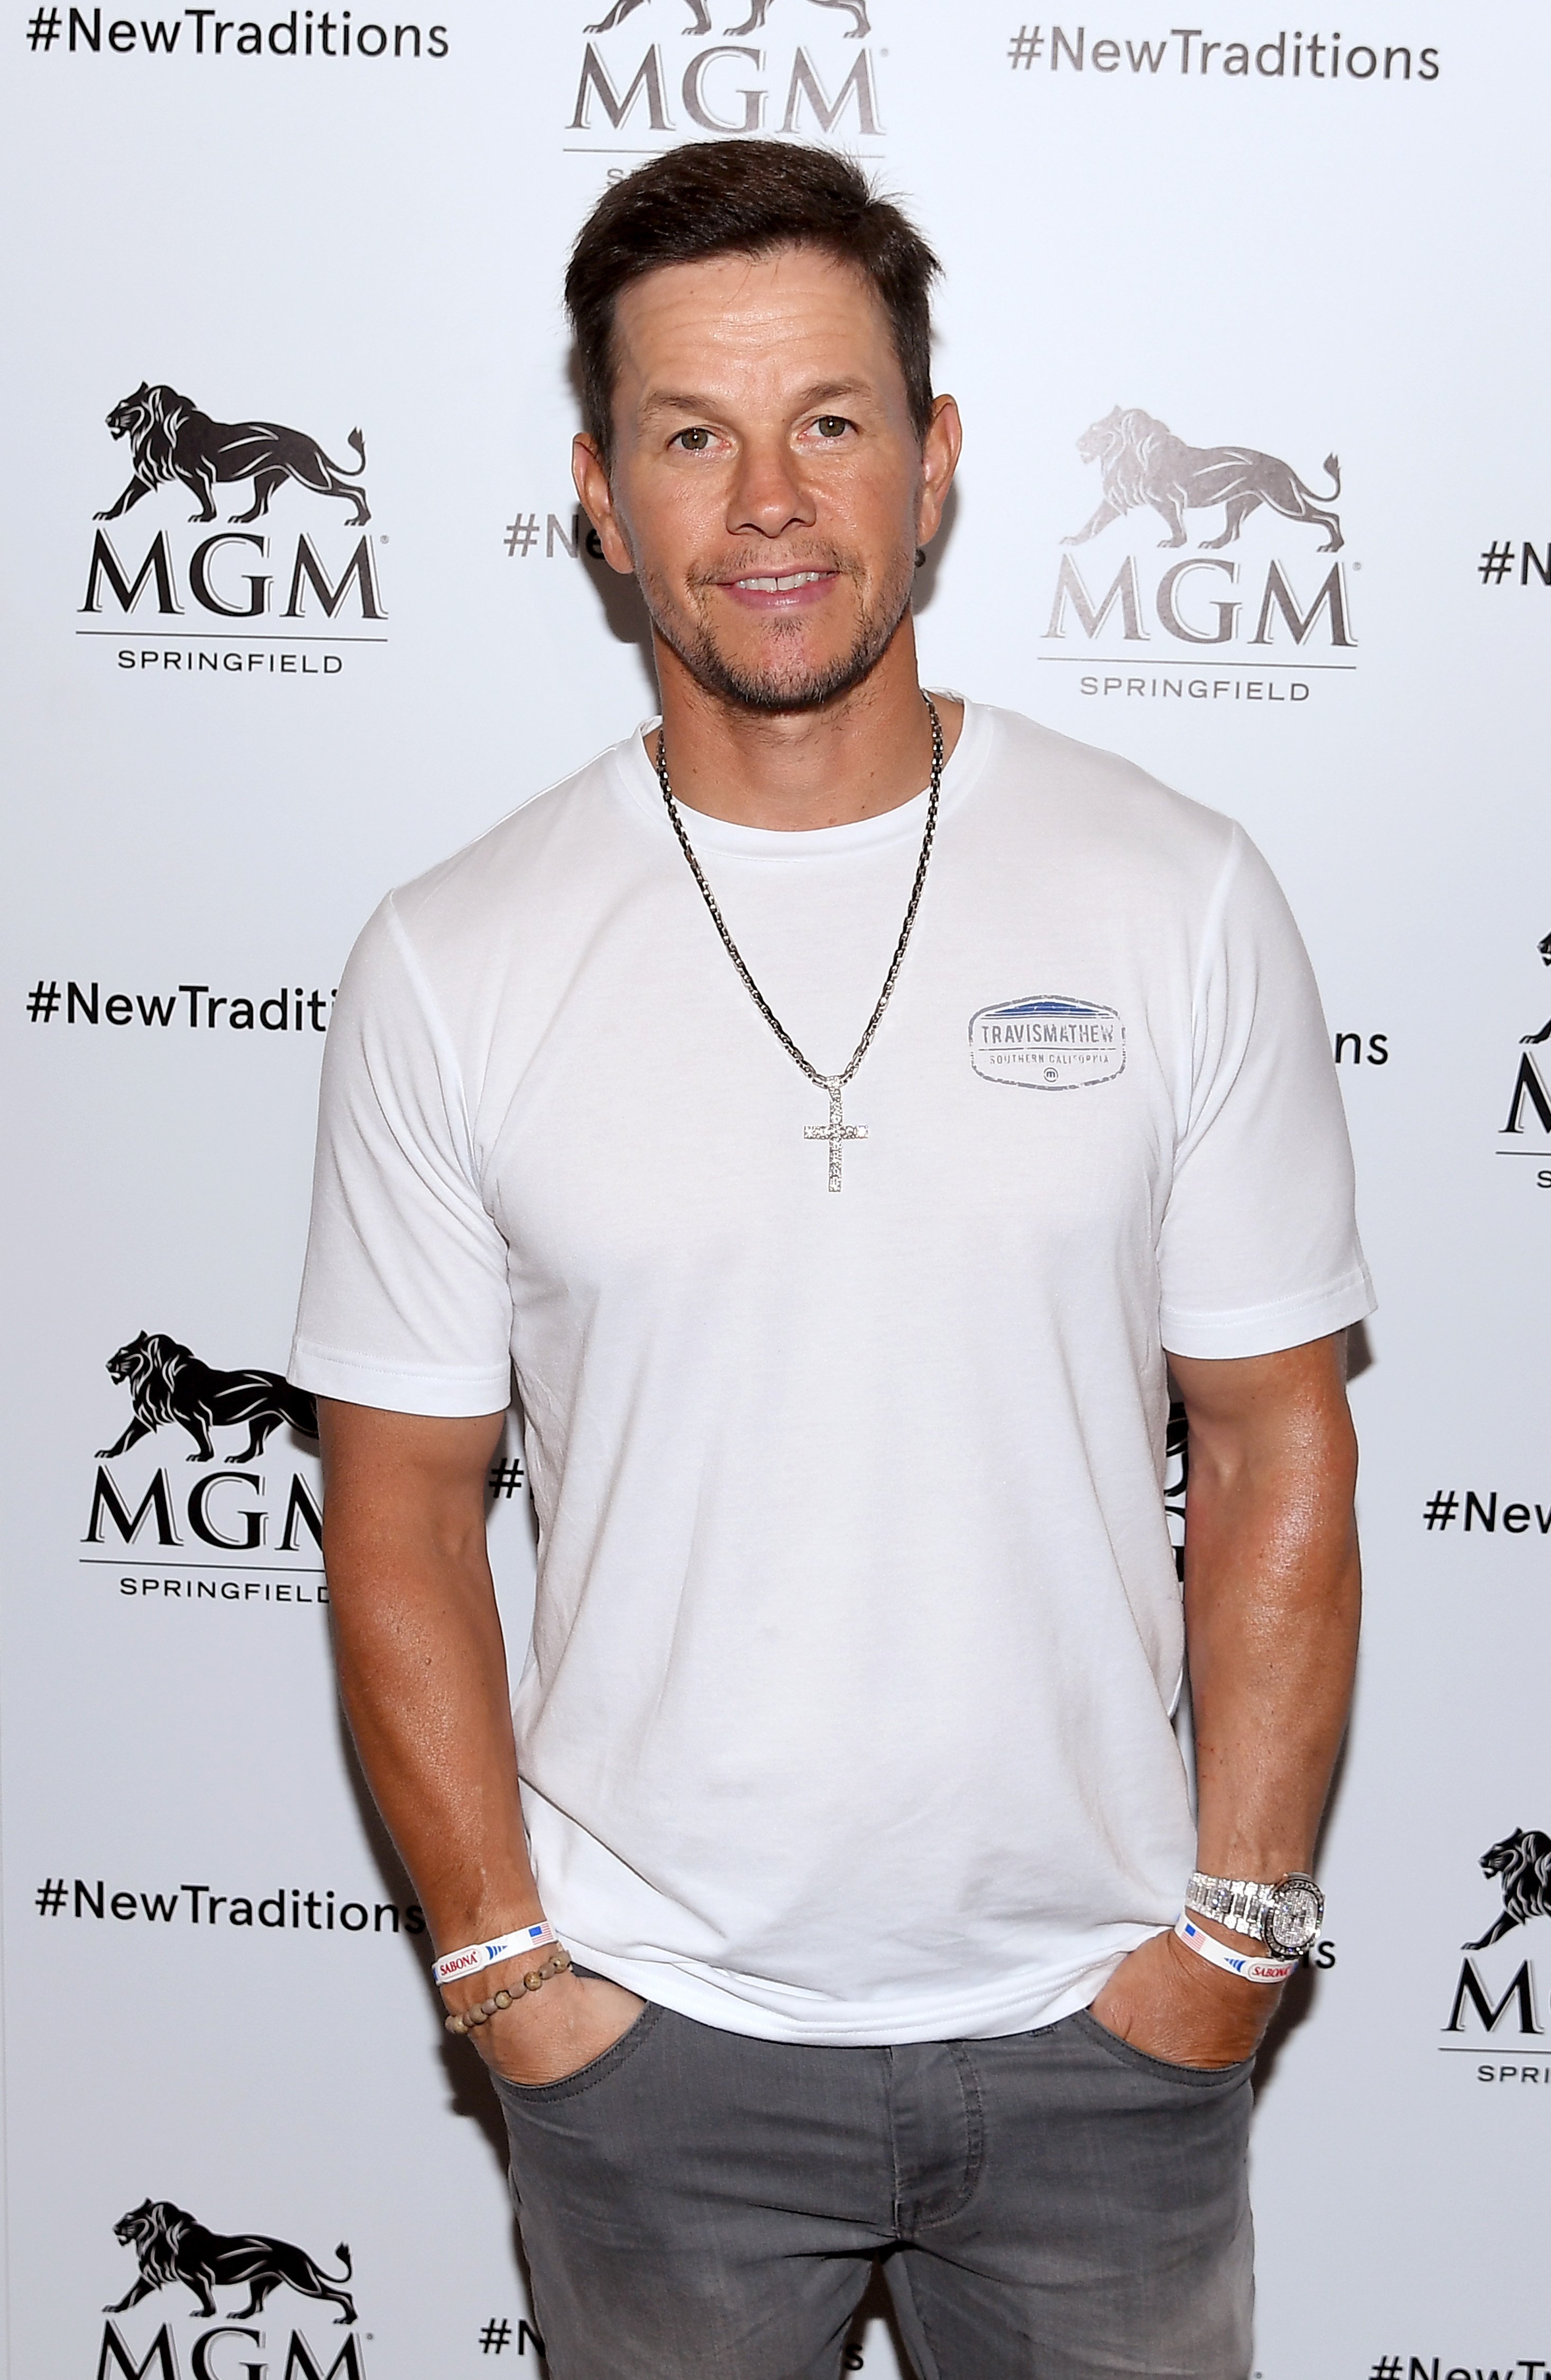 Mark Wahlberg announces the new Wahlburgers location coming to MGM Springfield in late 2019 on August 23, 2018 in Springfield, Massachusetts. | Source: Getty Images